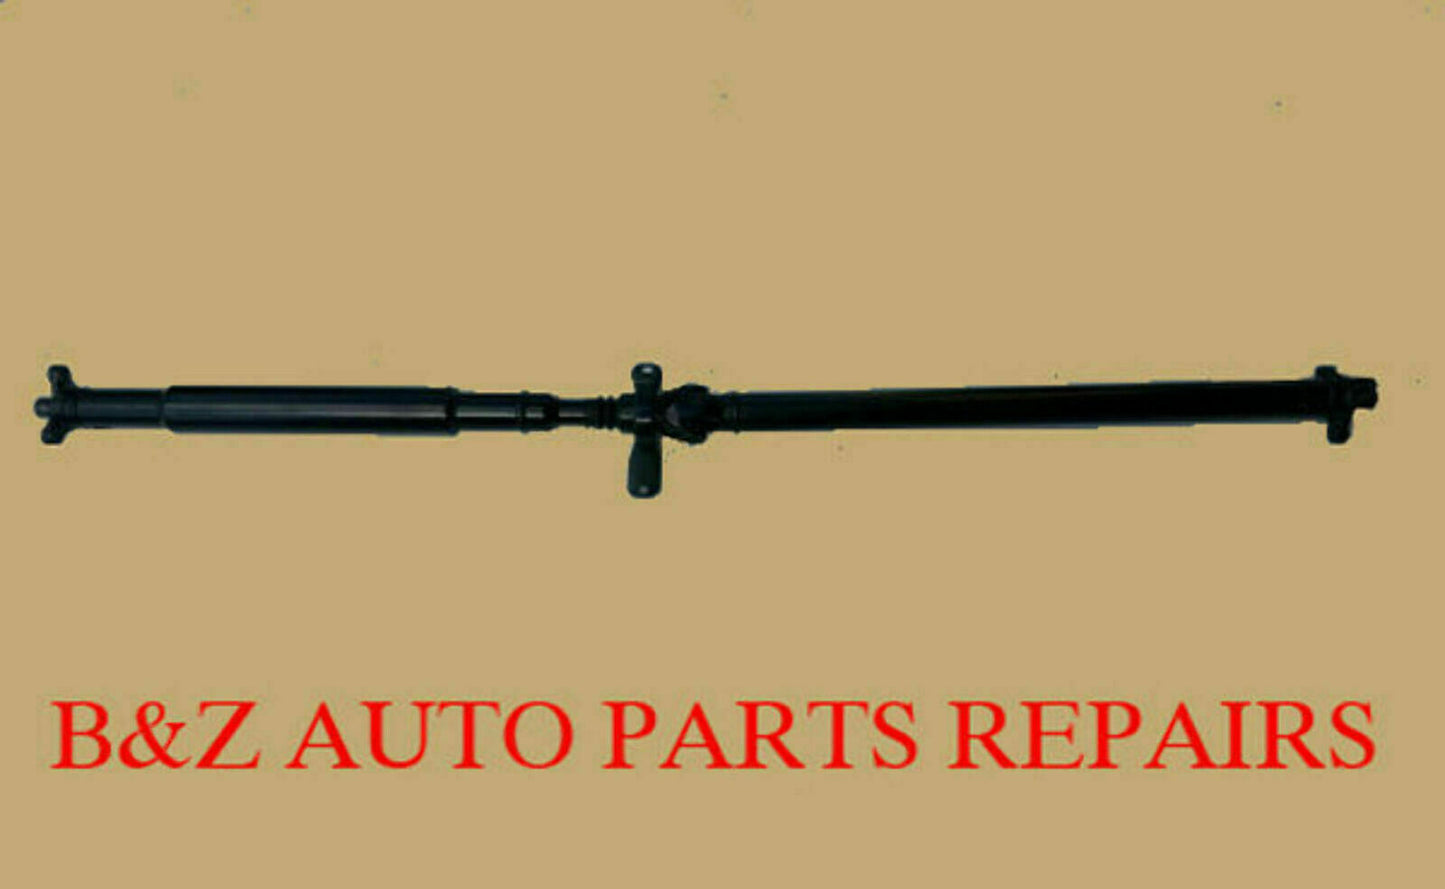 Holden Statesman WK 2004 5.7L Auto Reconditioned Tailshaft | B & Z Tailshafts